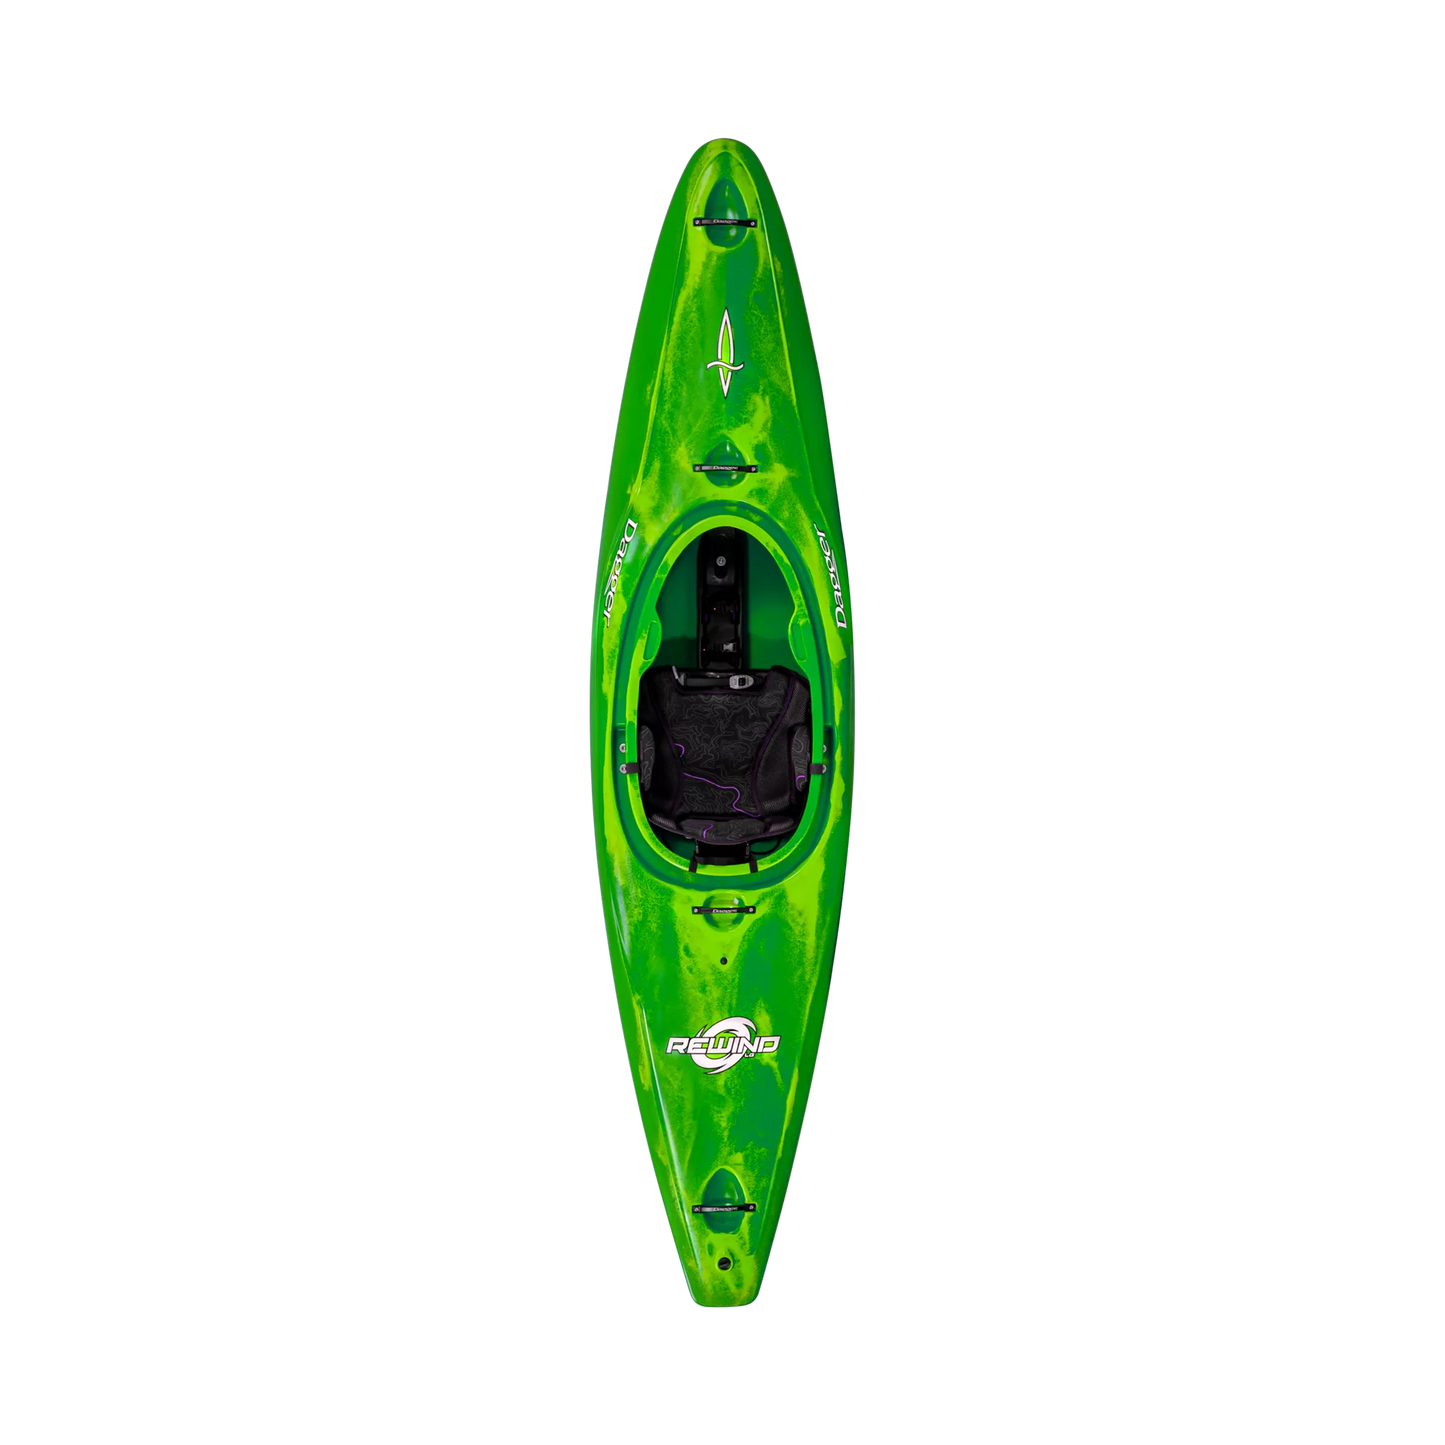 Green Smoke Dagger Rewind whitewater river play kayak with Contour Ergo Outfitting and new thigh brace system.